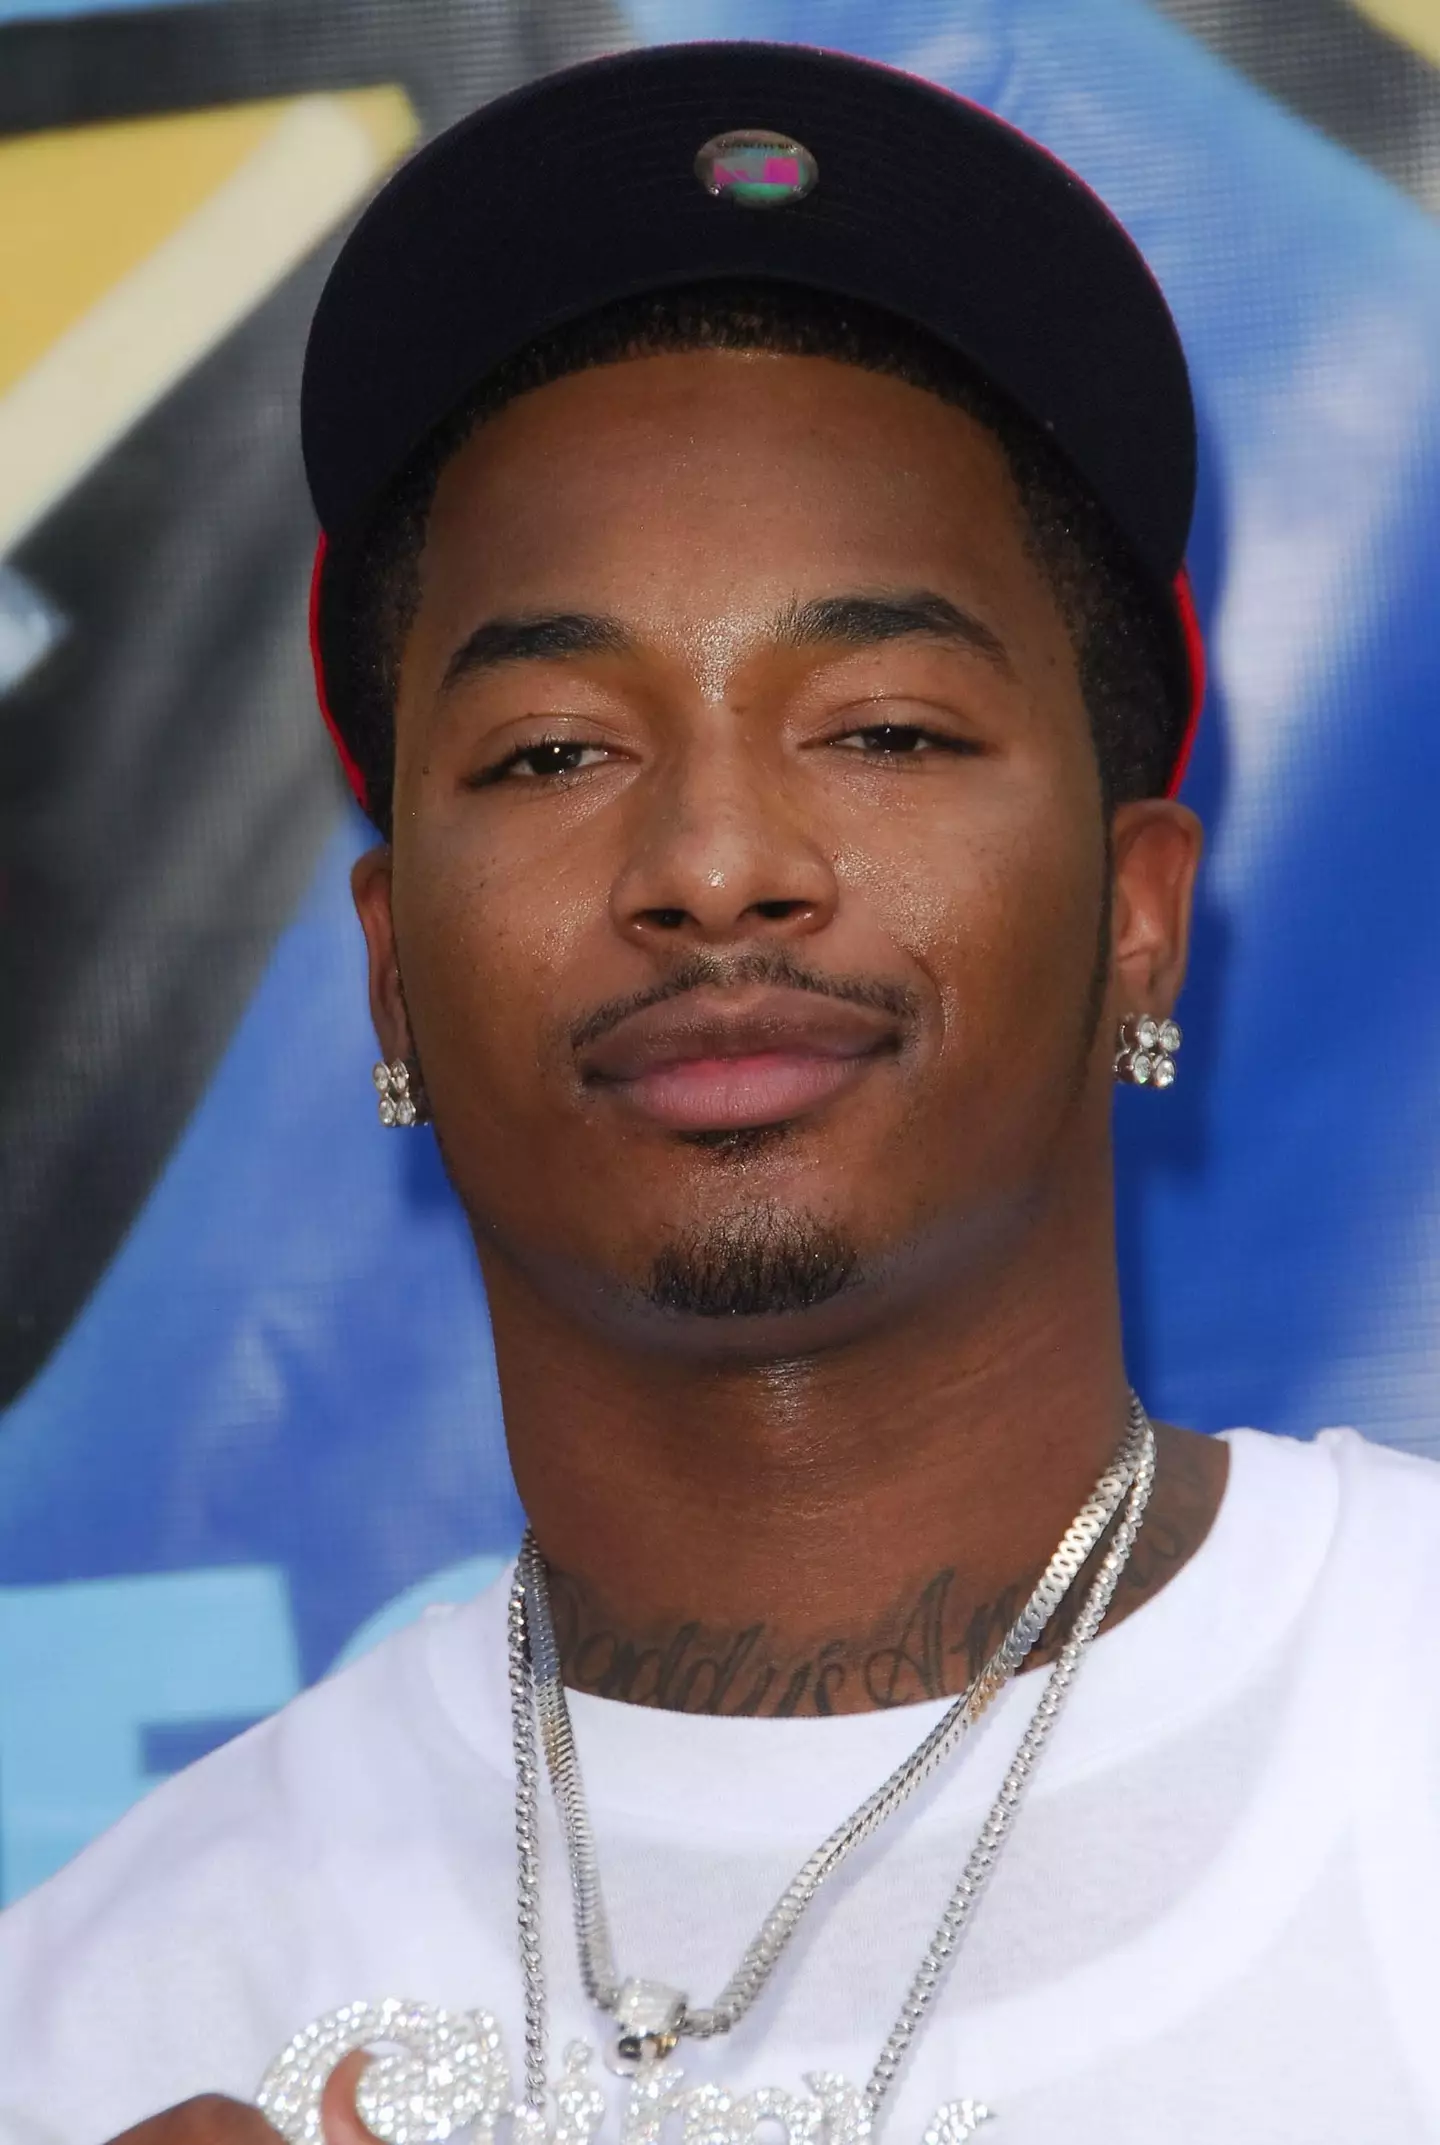 Chingy in 2007.